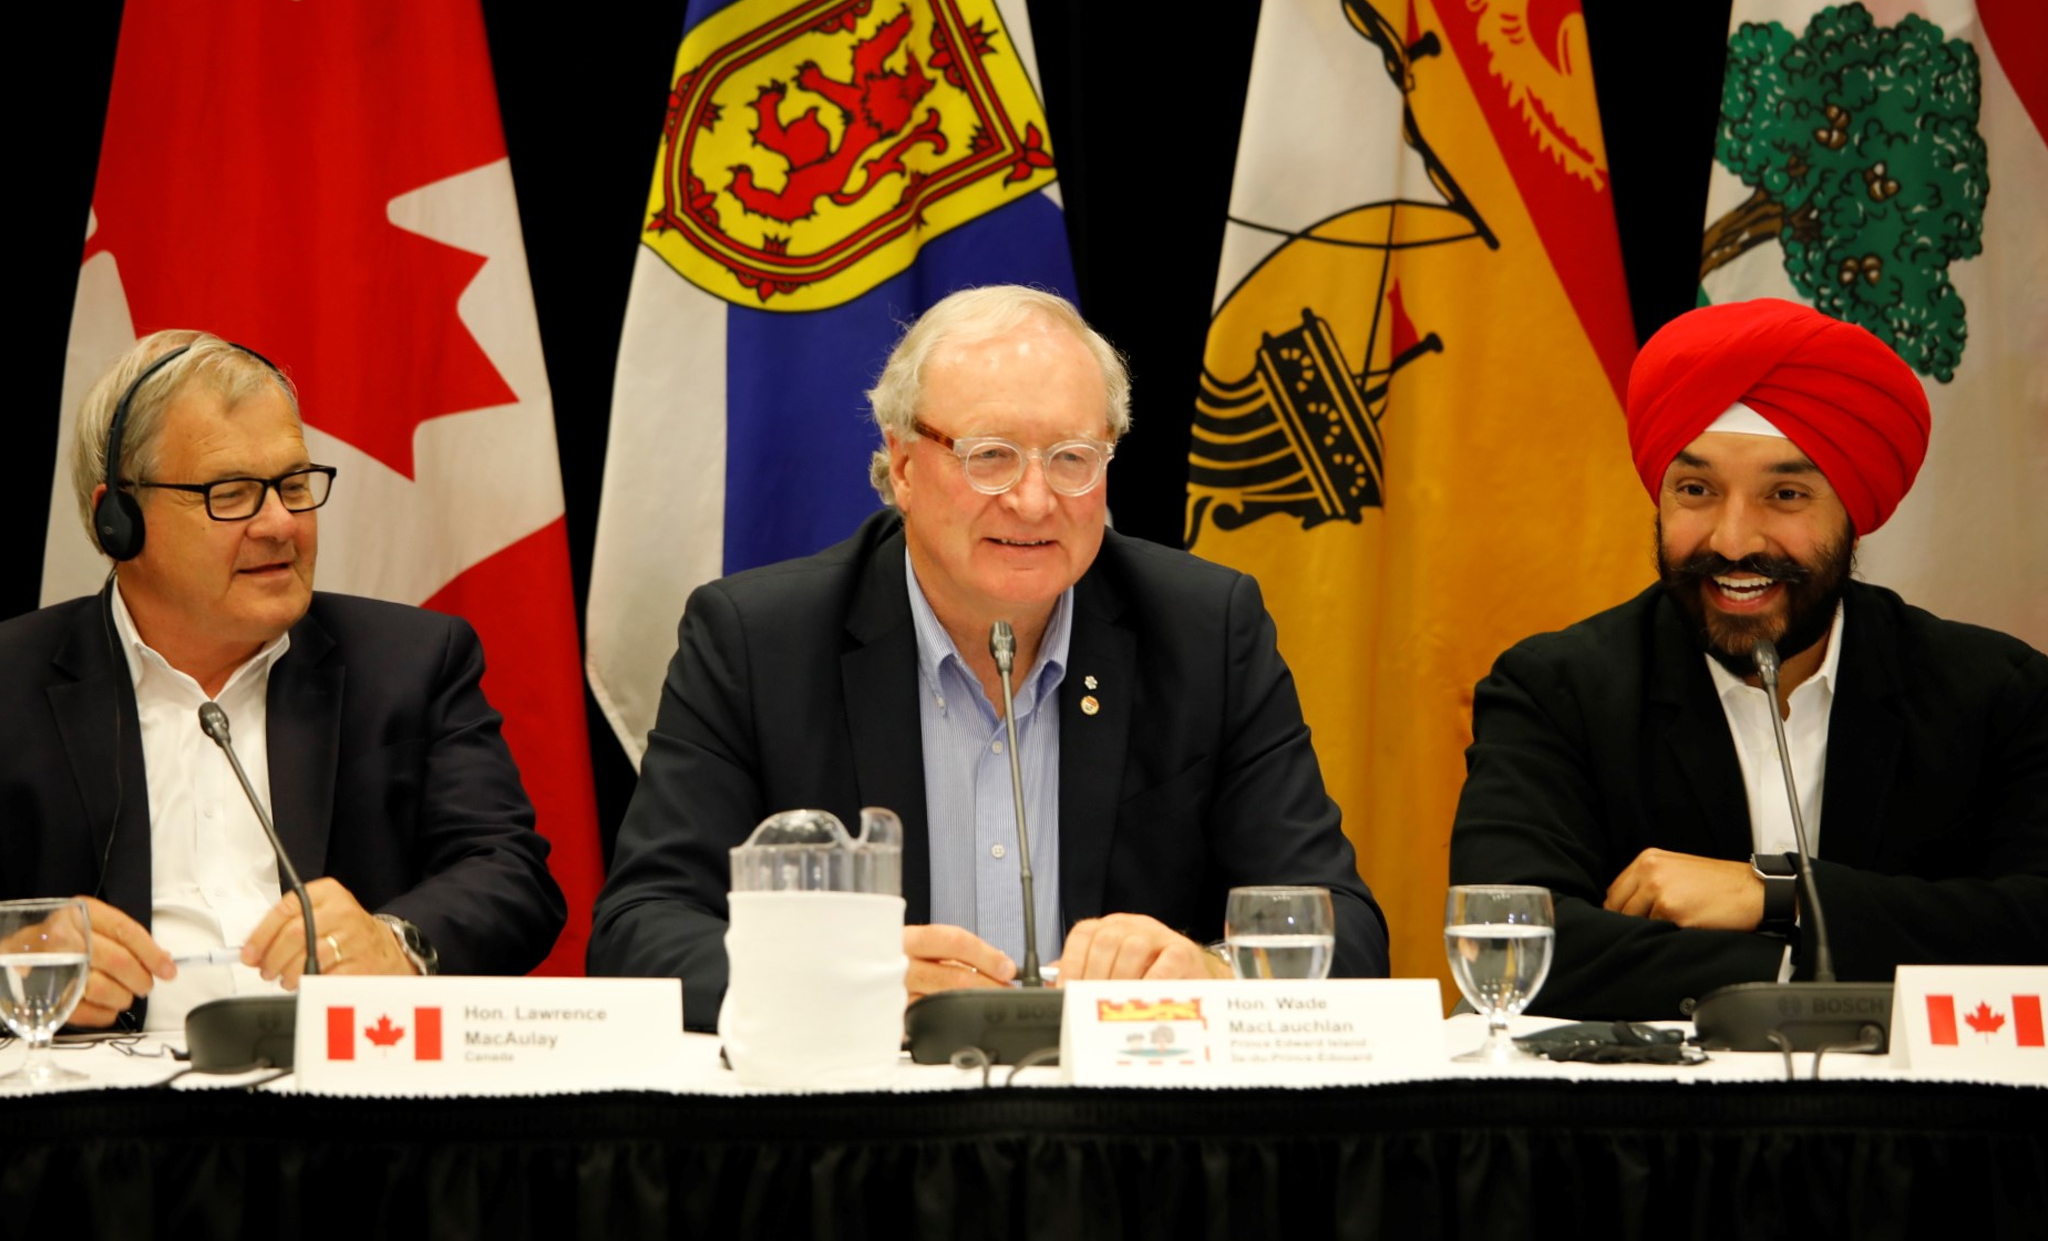 July 10, 2018 - The PEI co-hosts of the Atlantic Growth Strategy Leadership Committee meeting, Federal Agriculture and Agri-Food minister Lawrence MacAulay and Premier H. Wade MacLauchlan address members of the Committee along with Navdeep Bains, Minister of Innovation, Science and Economic Development and Minister responsible for the Atlantic Canada Opportunities Agency.